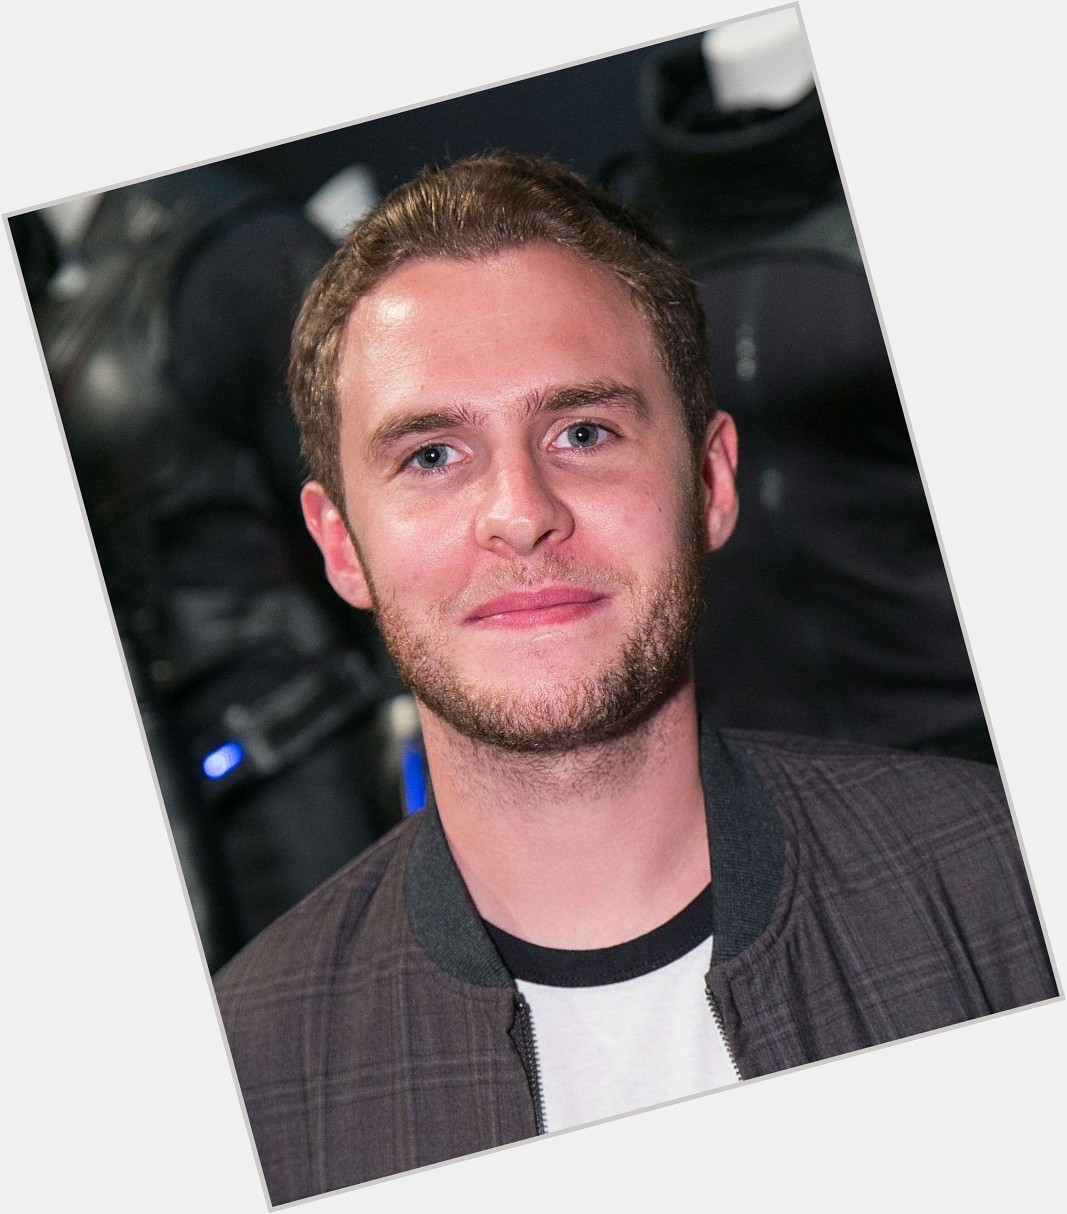 Happy birthday to Iain De Caestecker, the most wonderful man and actor out there!!! 